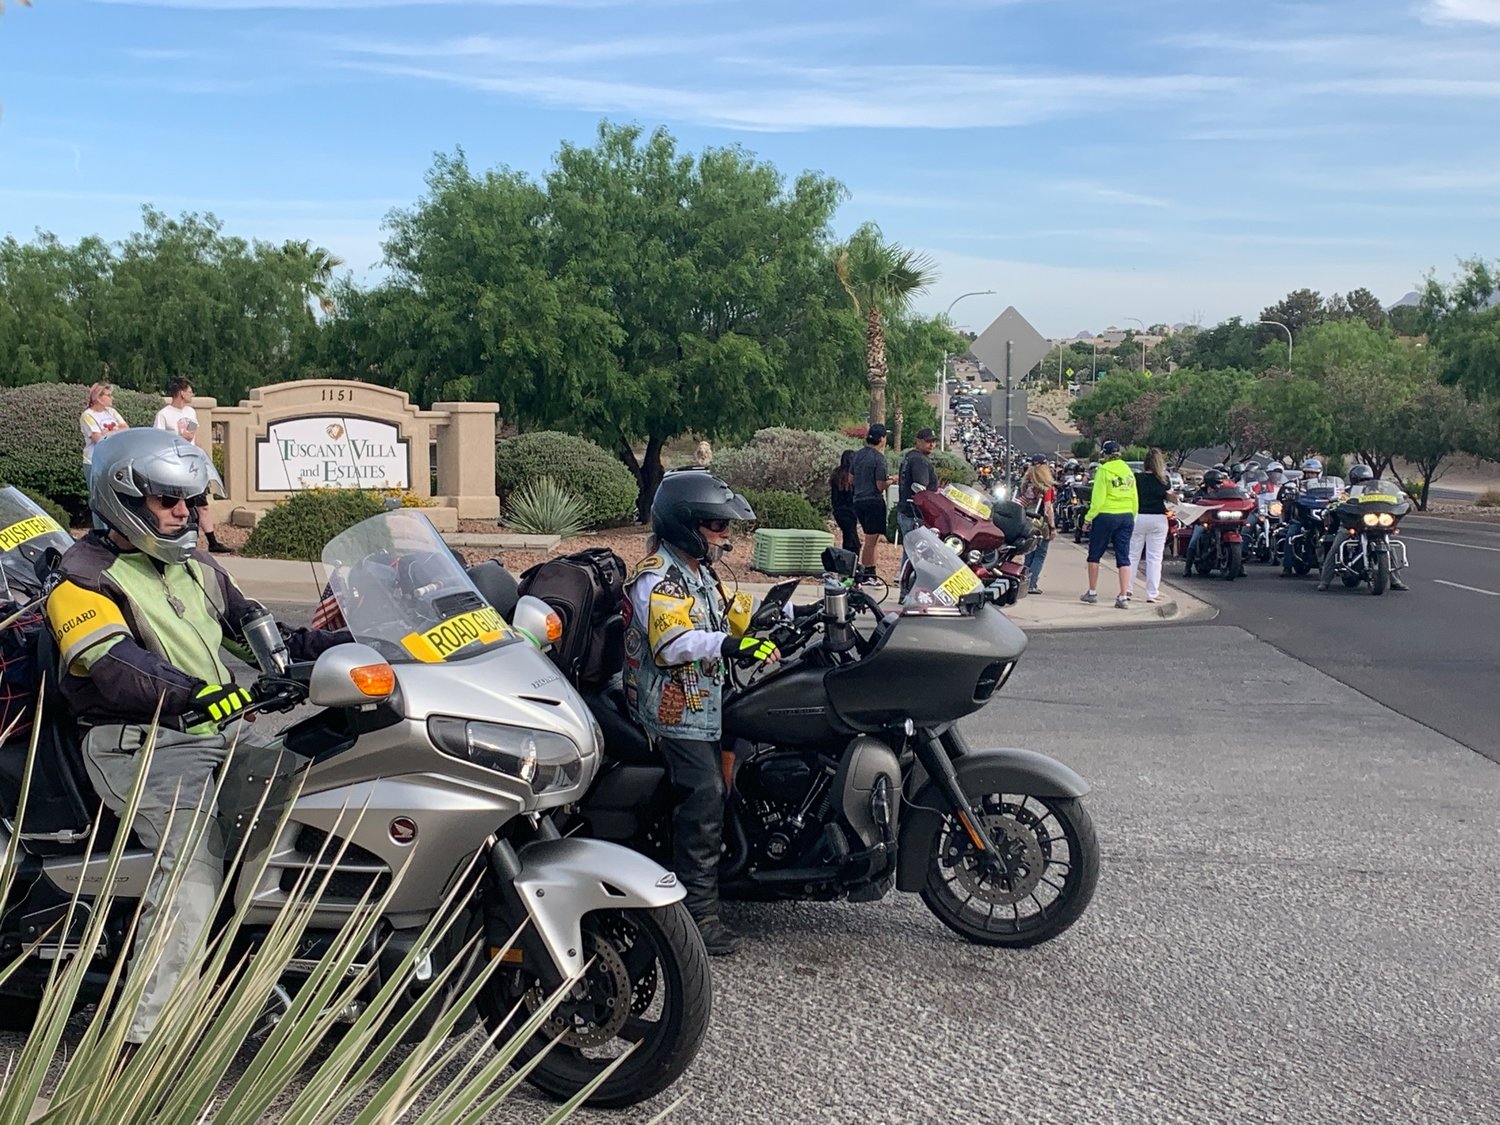 Heading out, continuing their journey to spend Memorial Day in Washington D.C. to visit the Vietnam Memorial Wall, the Run for the Wall cross-country motorcycle run departs Las Cruces Friday, May 20, following a wreath-laying ceremony at the Vietnam Veterans  Memorial at Las Cruces Veterans Park.